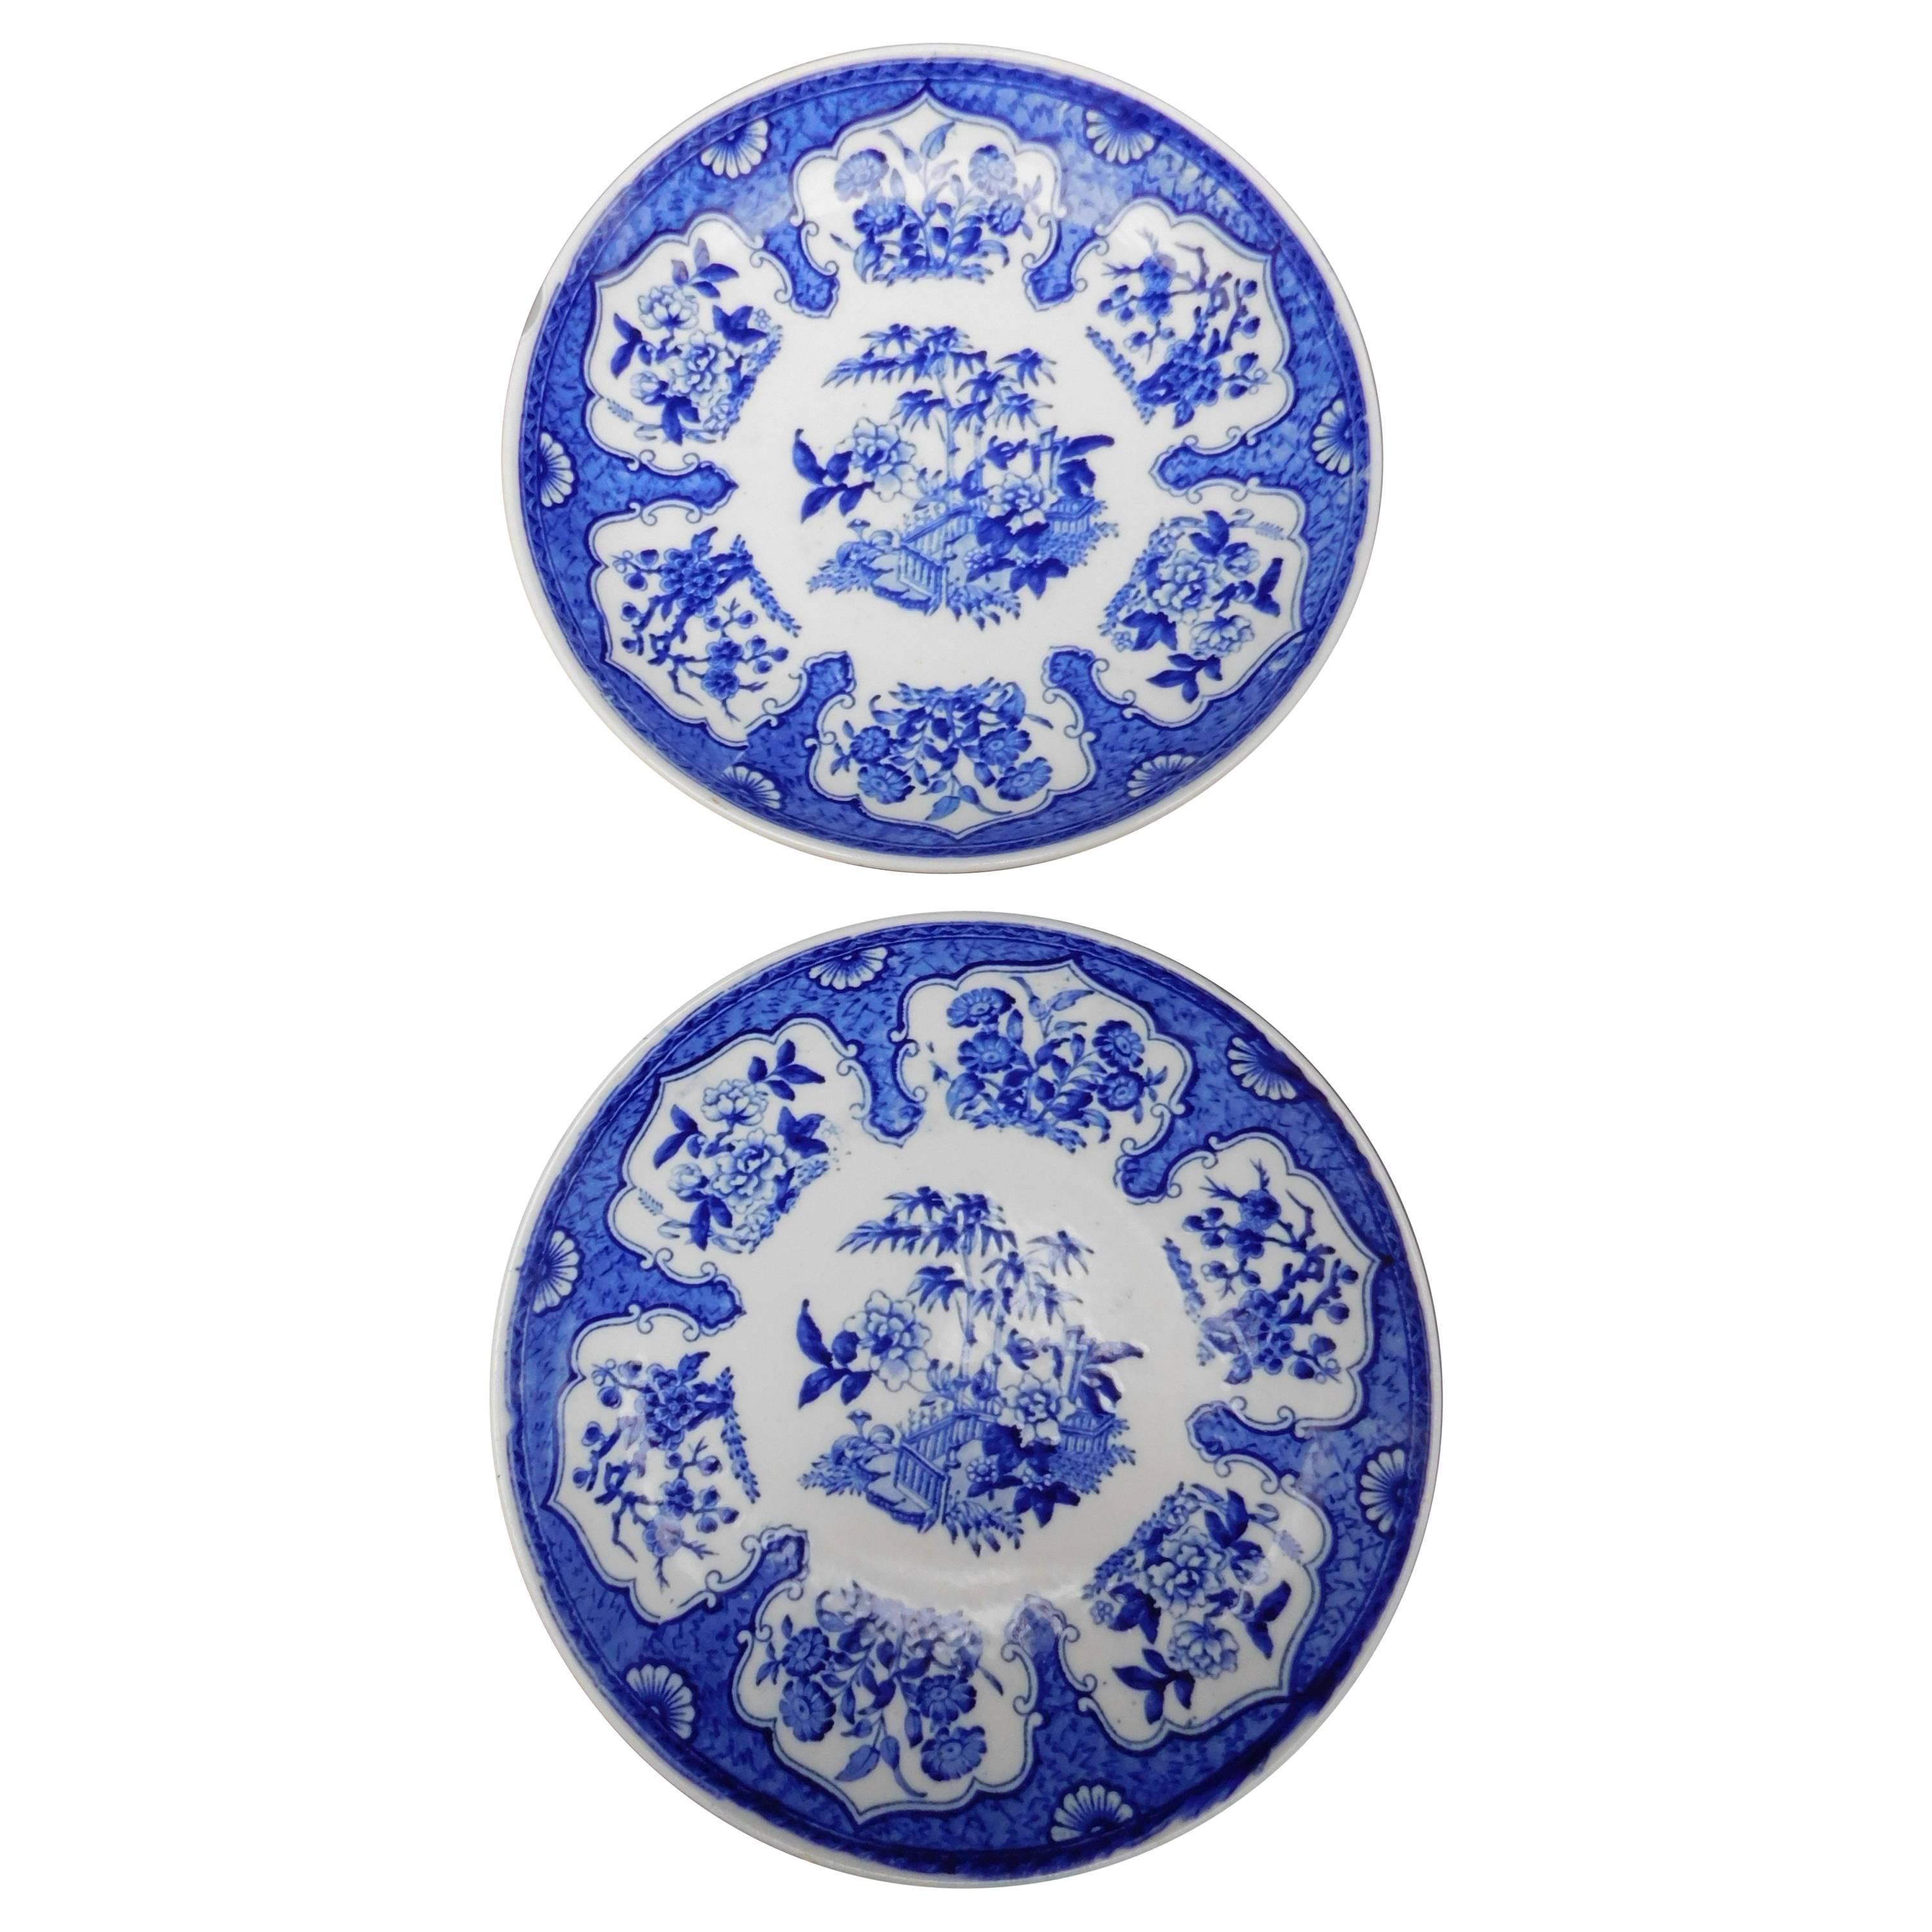 Pair of 19th Century Dutch Blue and White Transfer Ware Plates "Bern" Pattern For Sale